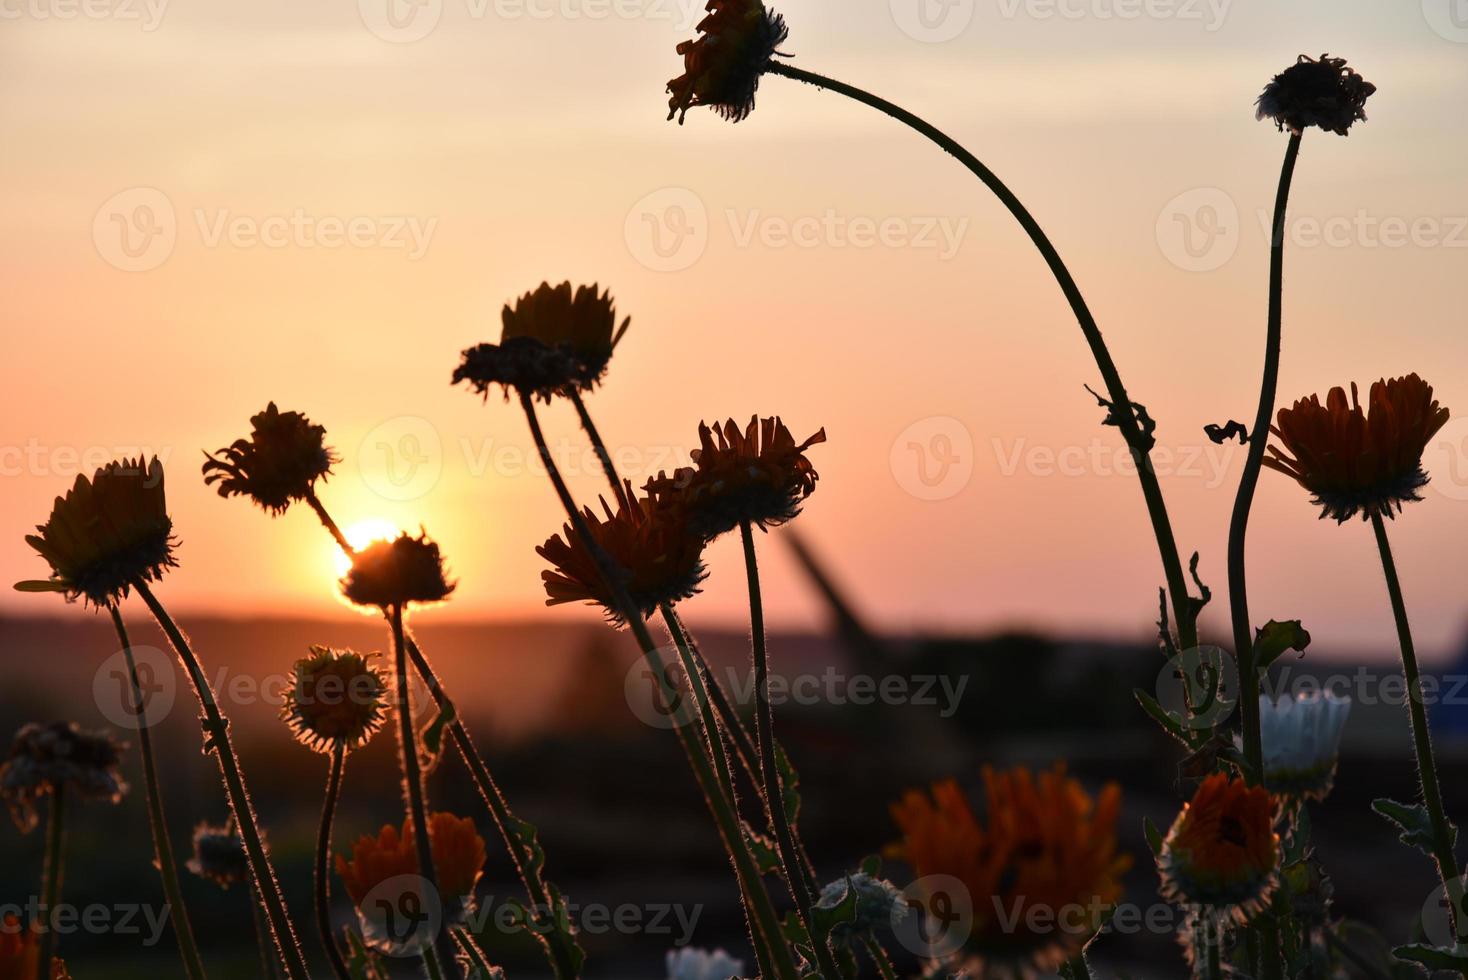 Aster flowers on the background of the sunset sky and the disk of the sun. Flowers bend over the setting sun. Evening landscape. photo